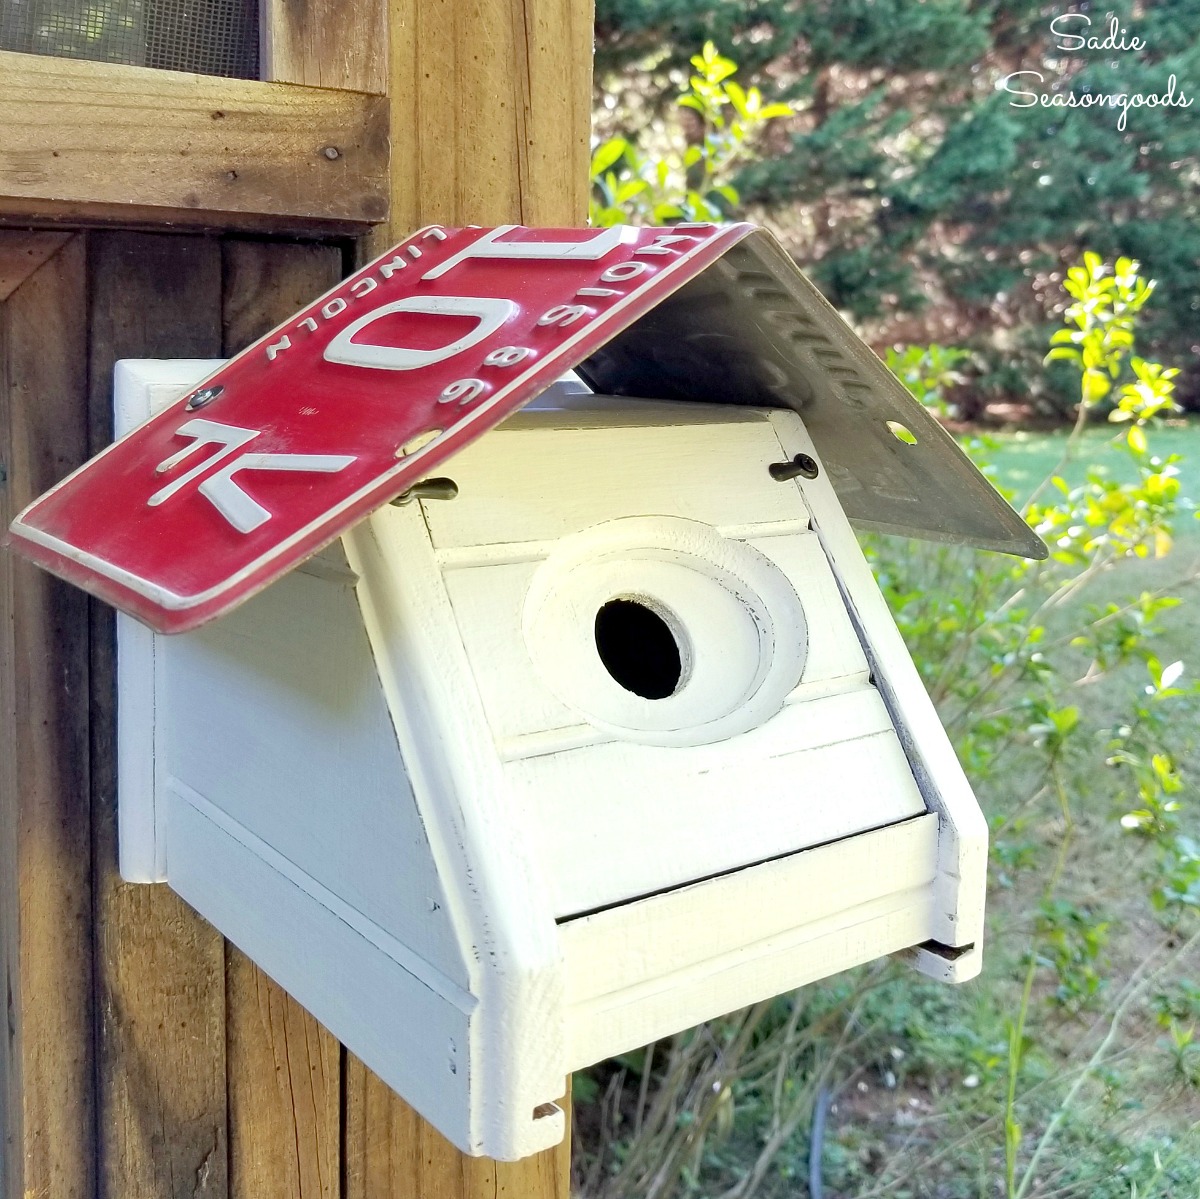 How to build a DIY bird house or chickadee bird house by upcycling a tissue box holder and license plate for the roof